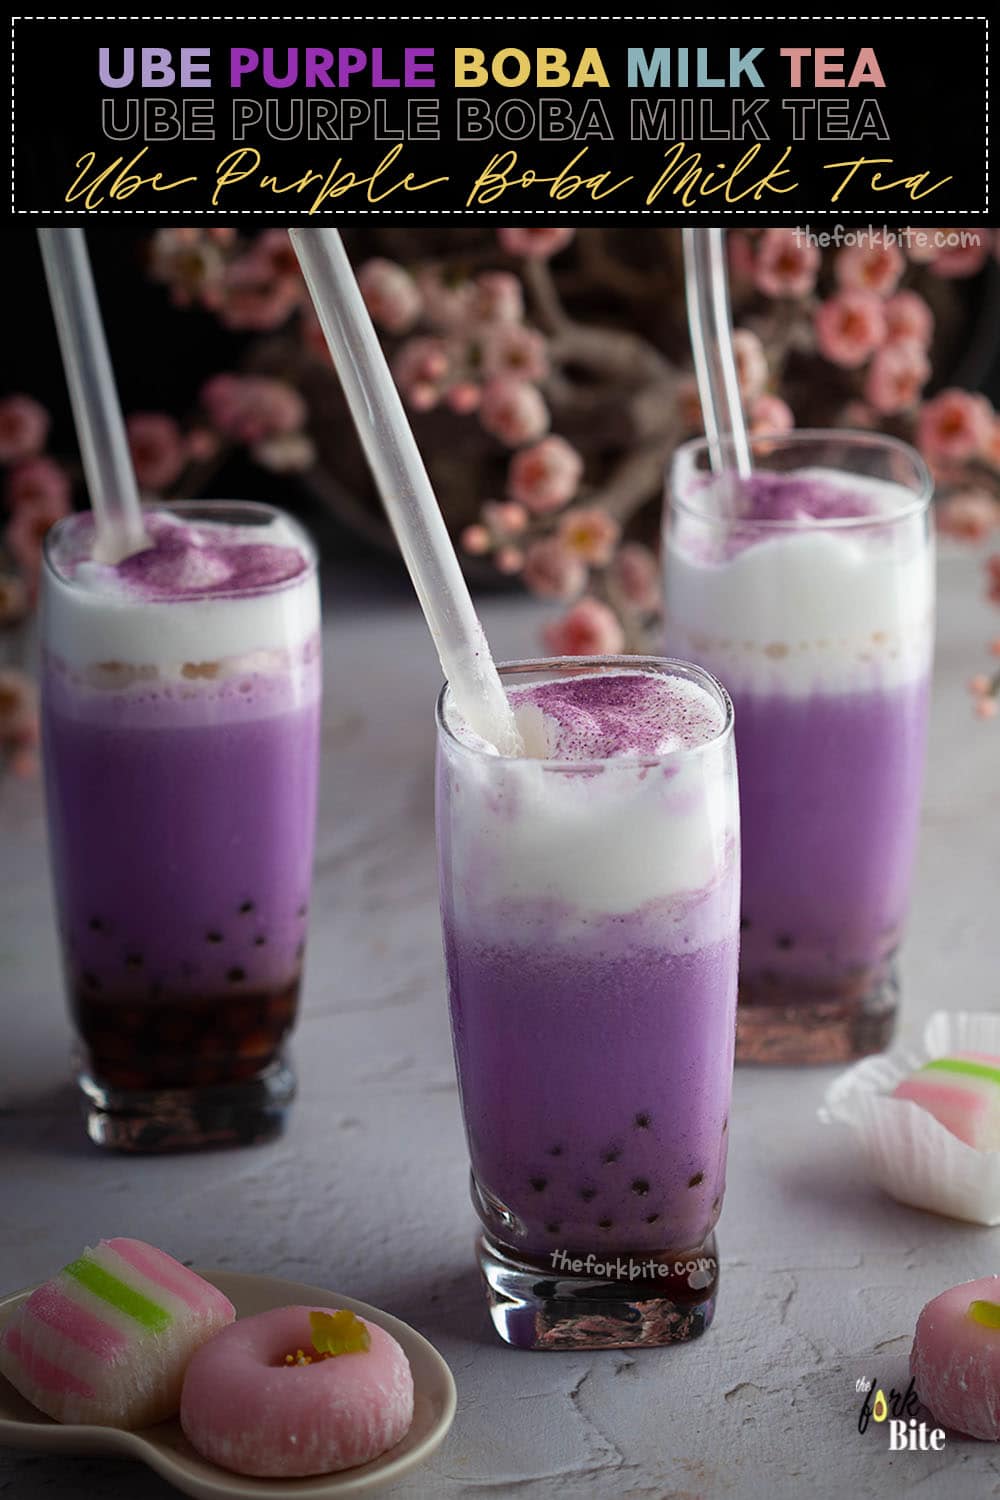 This purple boba famously known as Taro milk tea is rich, creamy milk tea that contains fresh taro roots and luscious purple sweet potatoes, a colorfully purple drink hugely prevalent all over Asia.